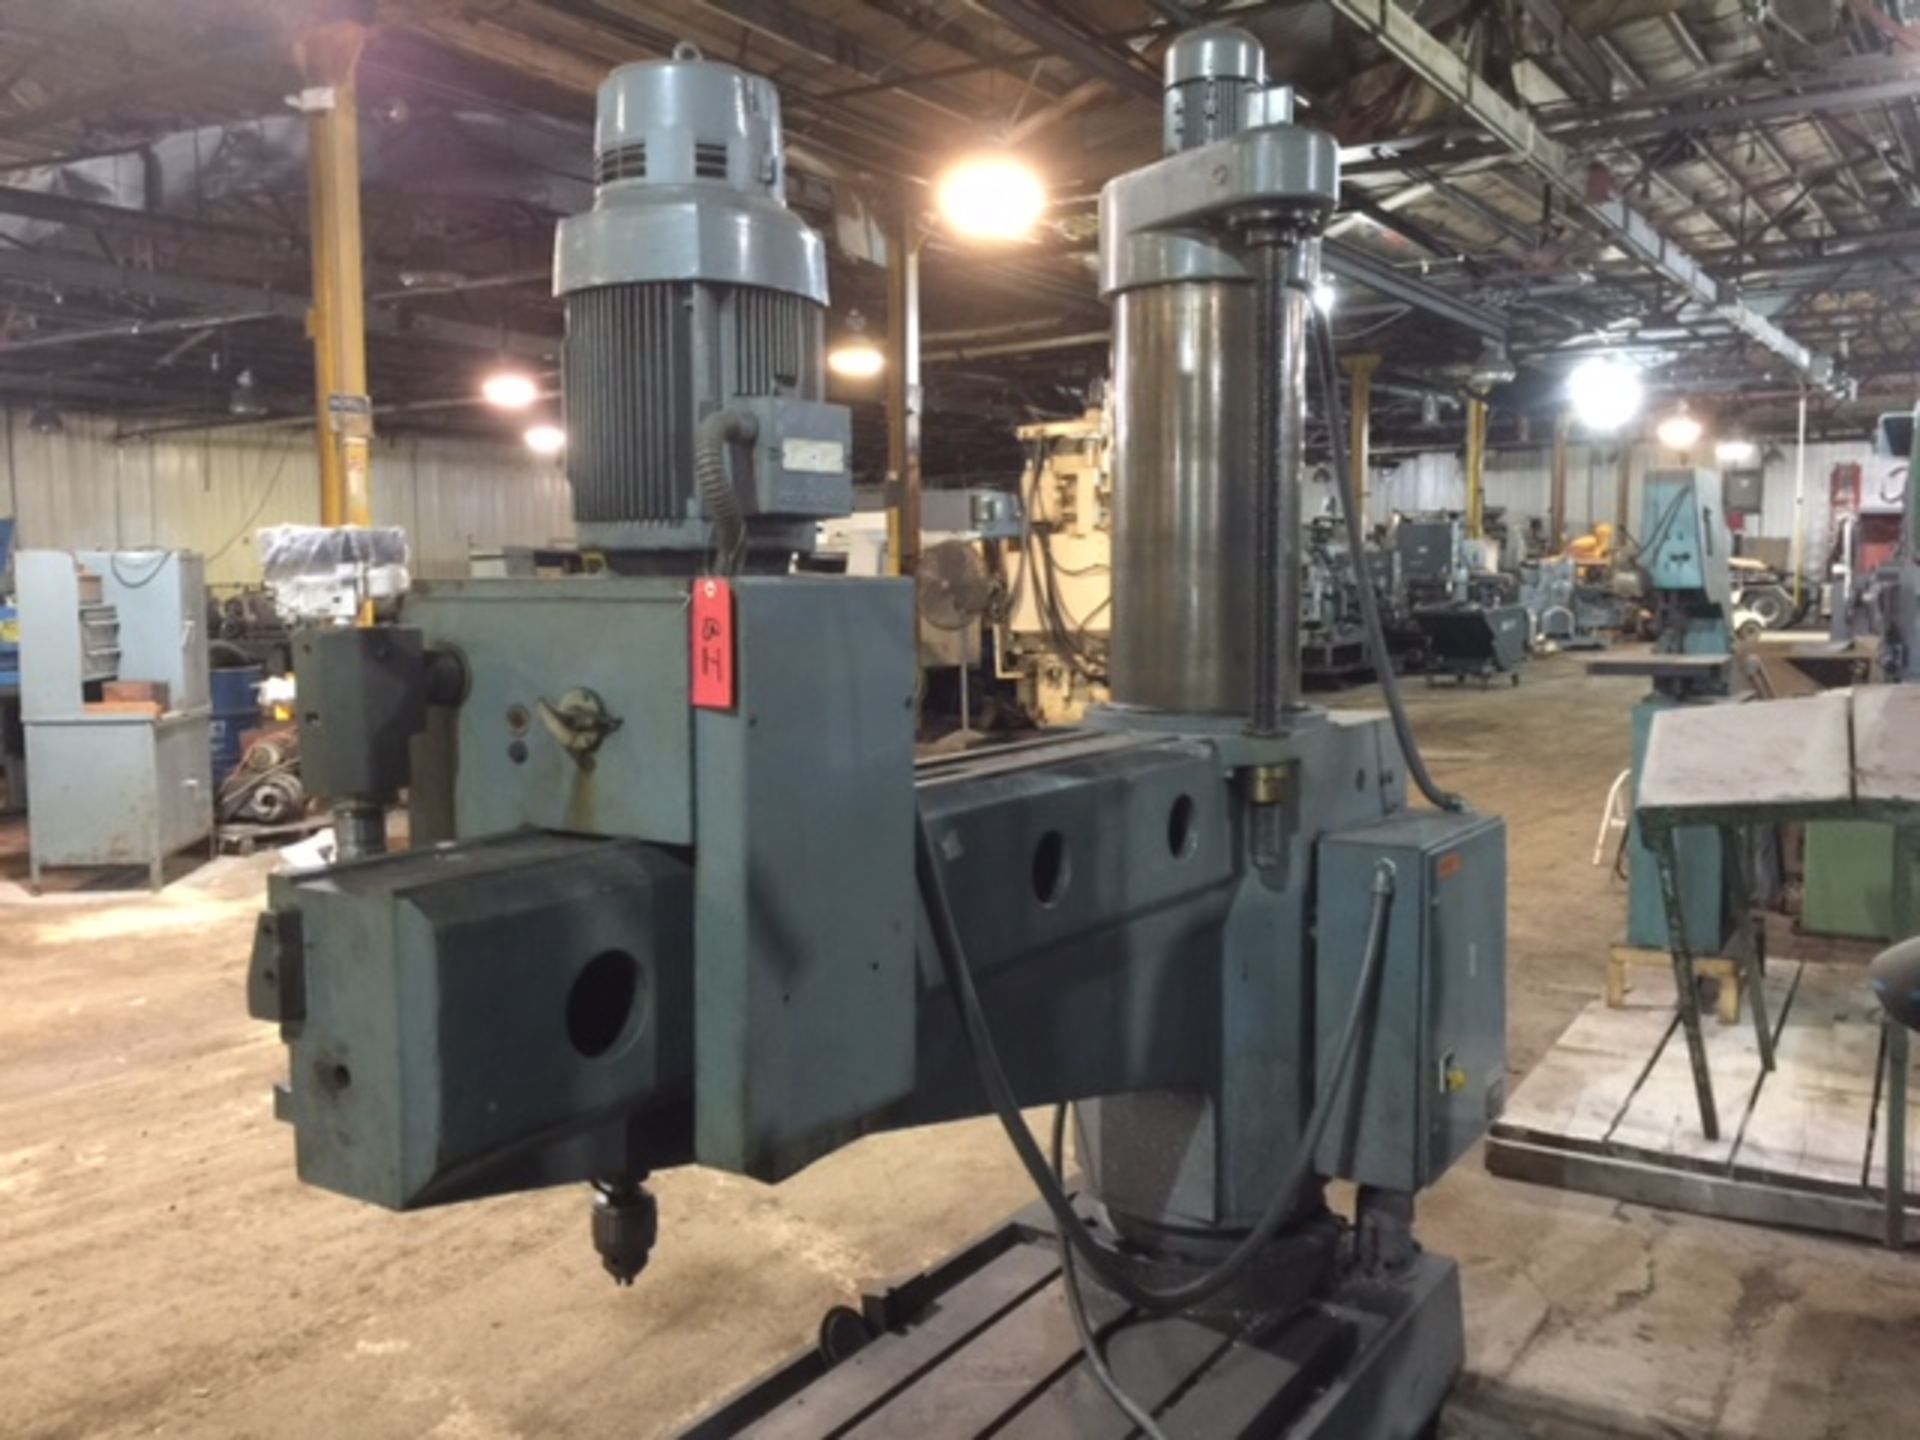 SOUTHBEND 5' X 12" RADIAL ARM DRILL PRESS - Image 3 of 3